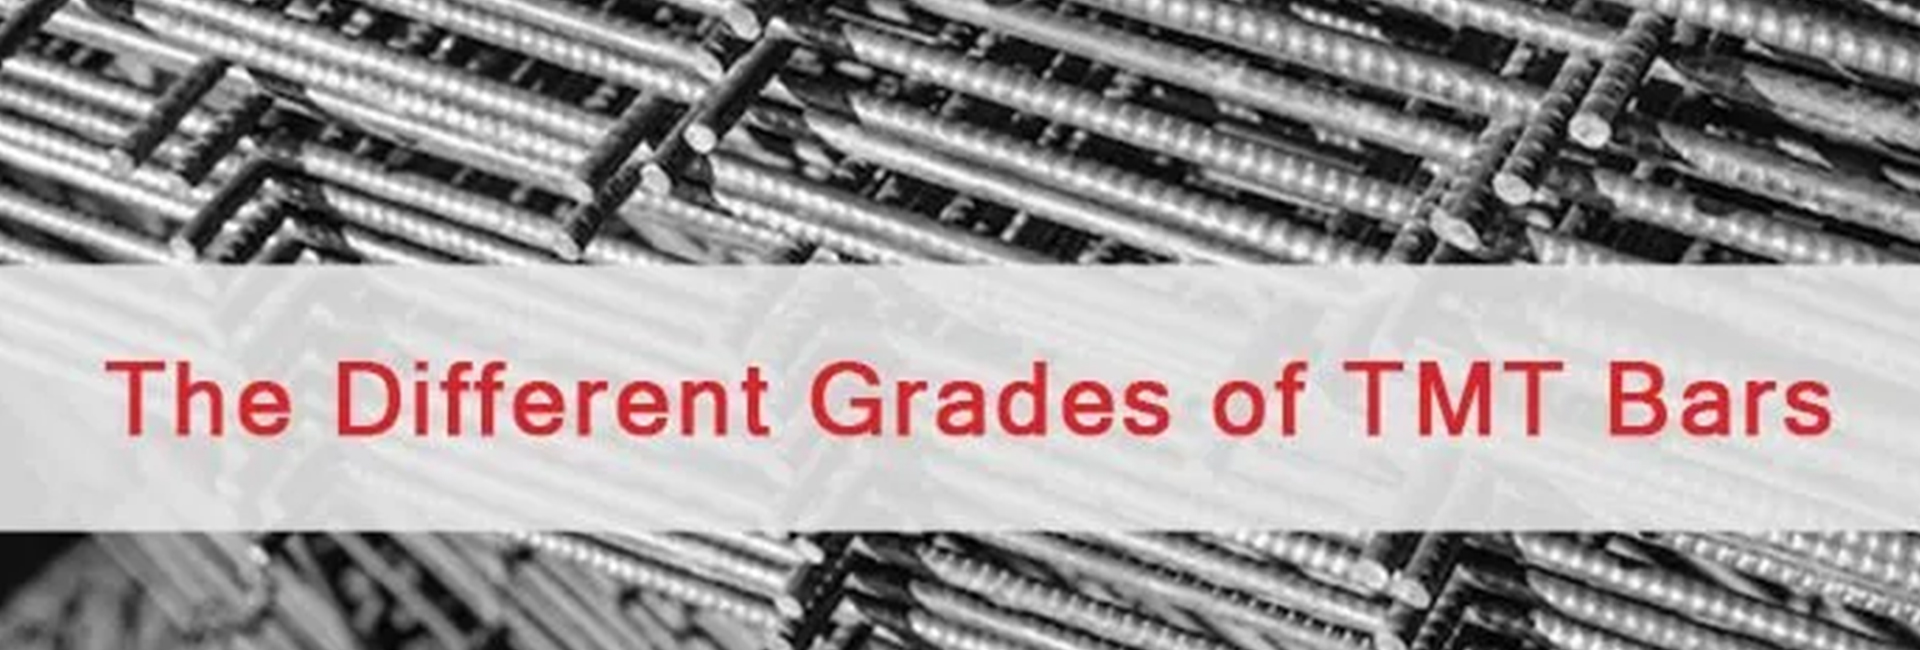 What Are the Different Grades of TMT Bars?